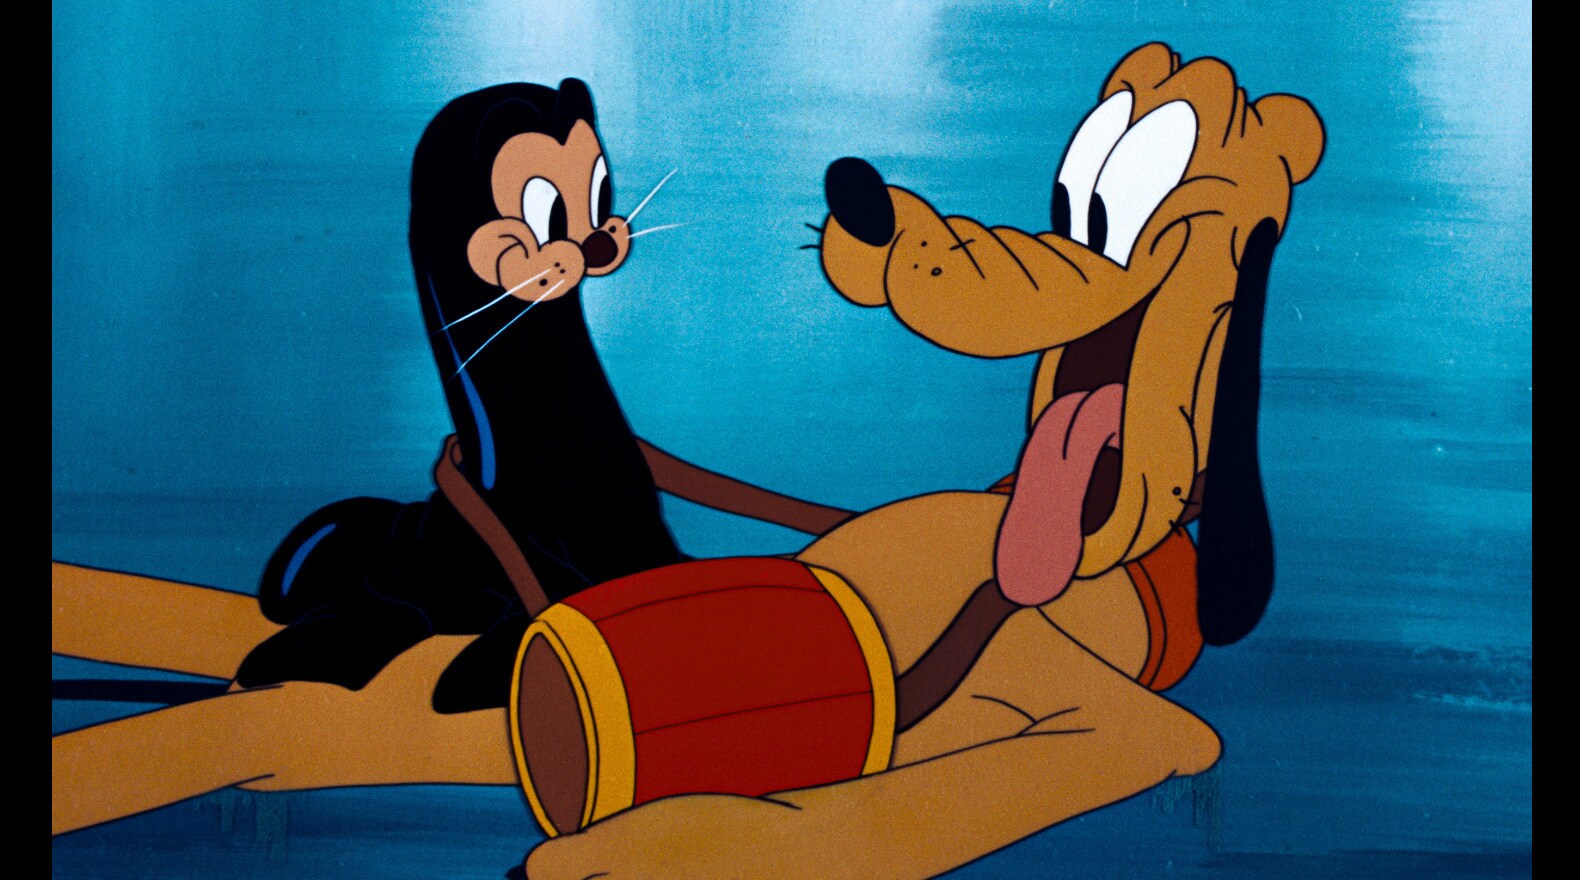 Pluto spends some quality time with the seal that Mickey asks him to guard.